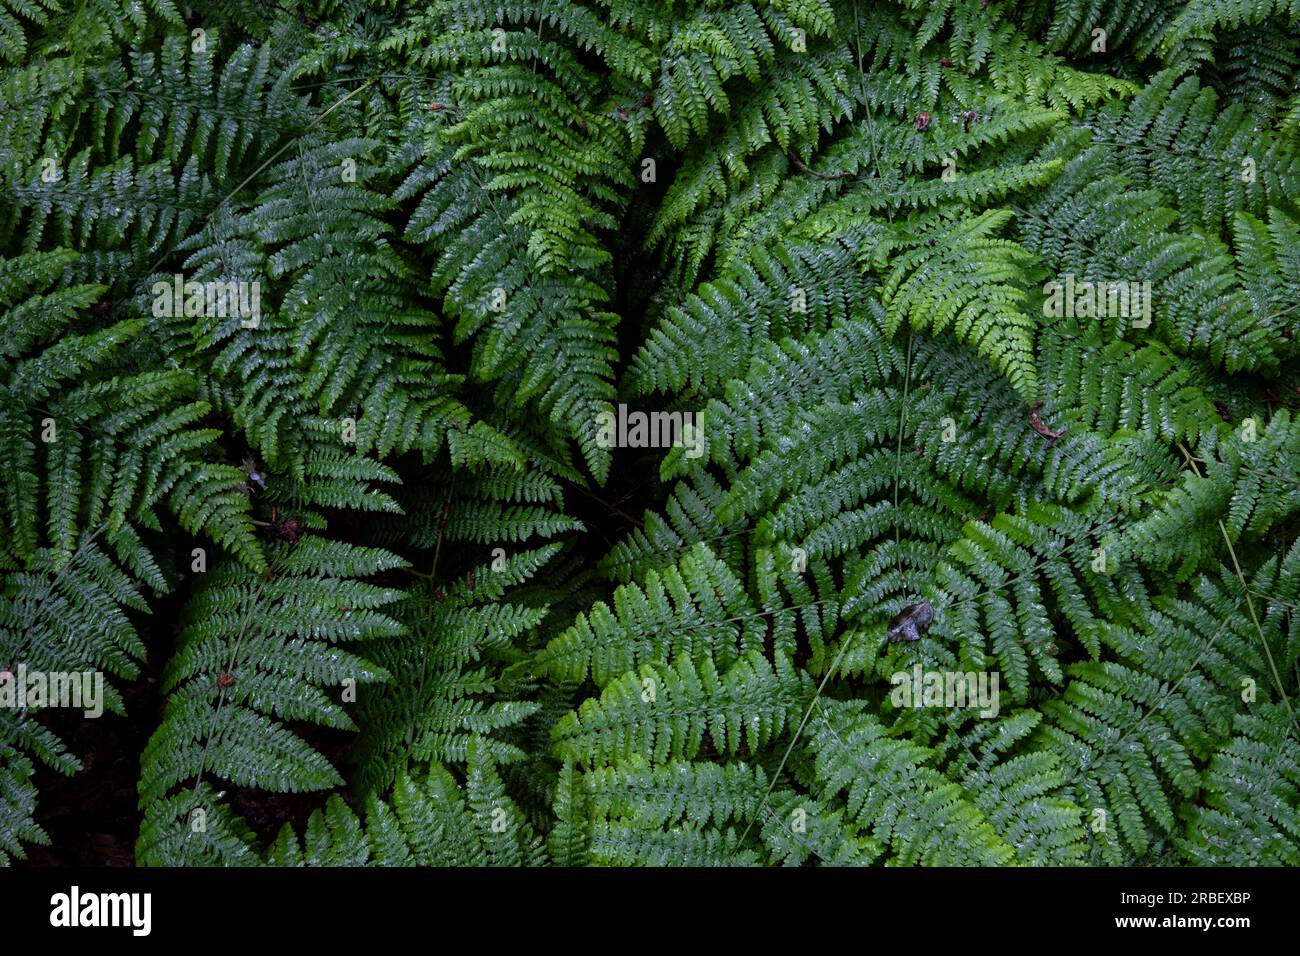 Lush green Common Fern deep in woodland in Worcestershire, ENgland.  The different shades og green create natures own pattern. Stock Photo